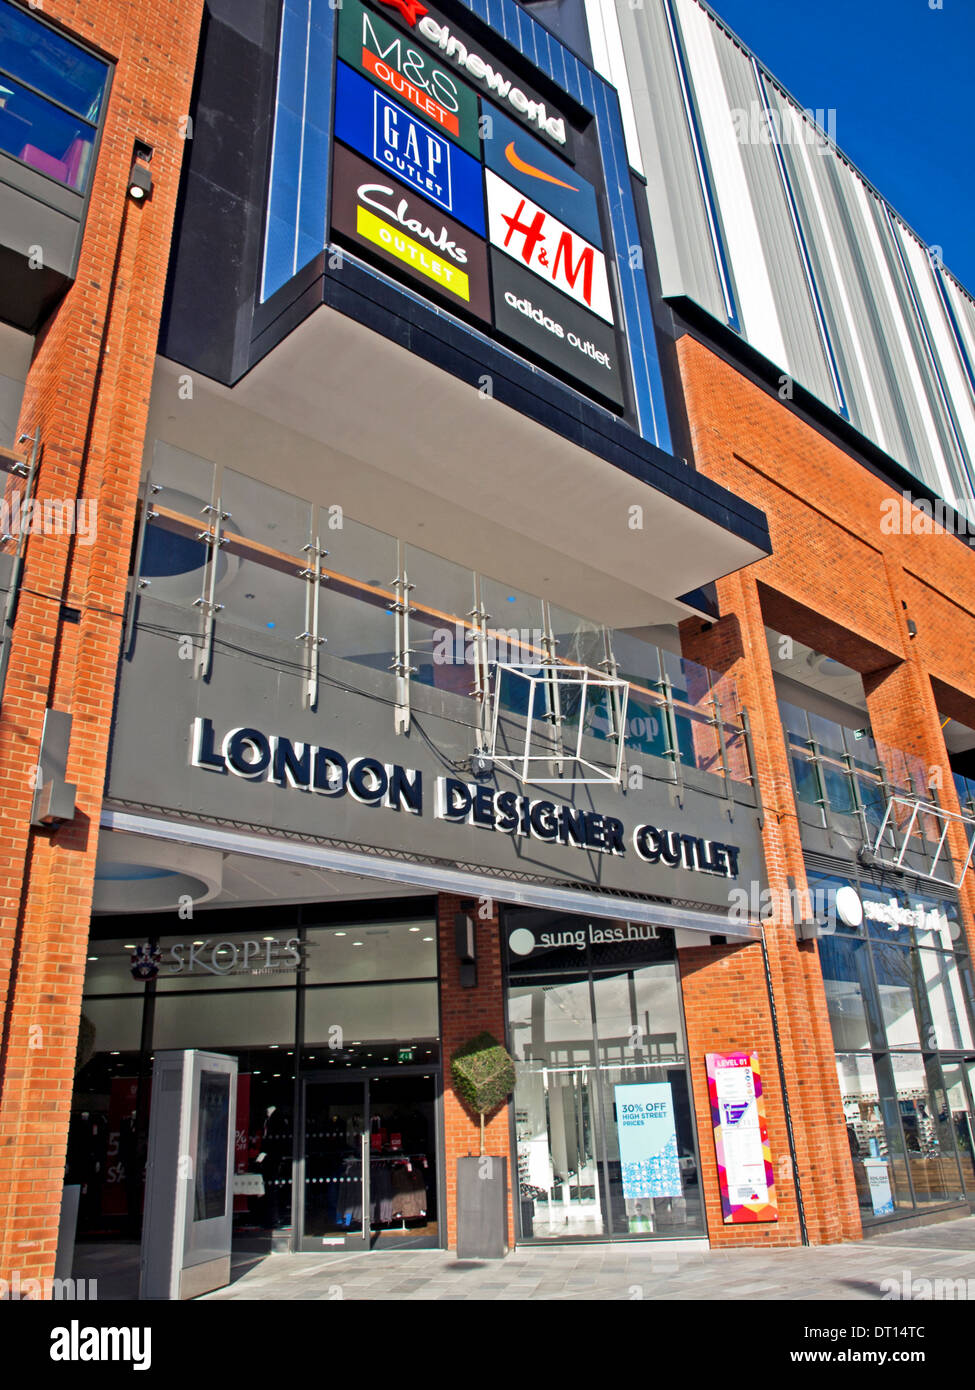 Wembley Outlet High Resolution Stock Photography and Images - Alamy